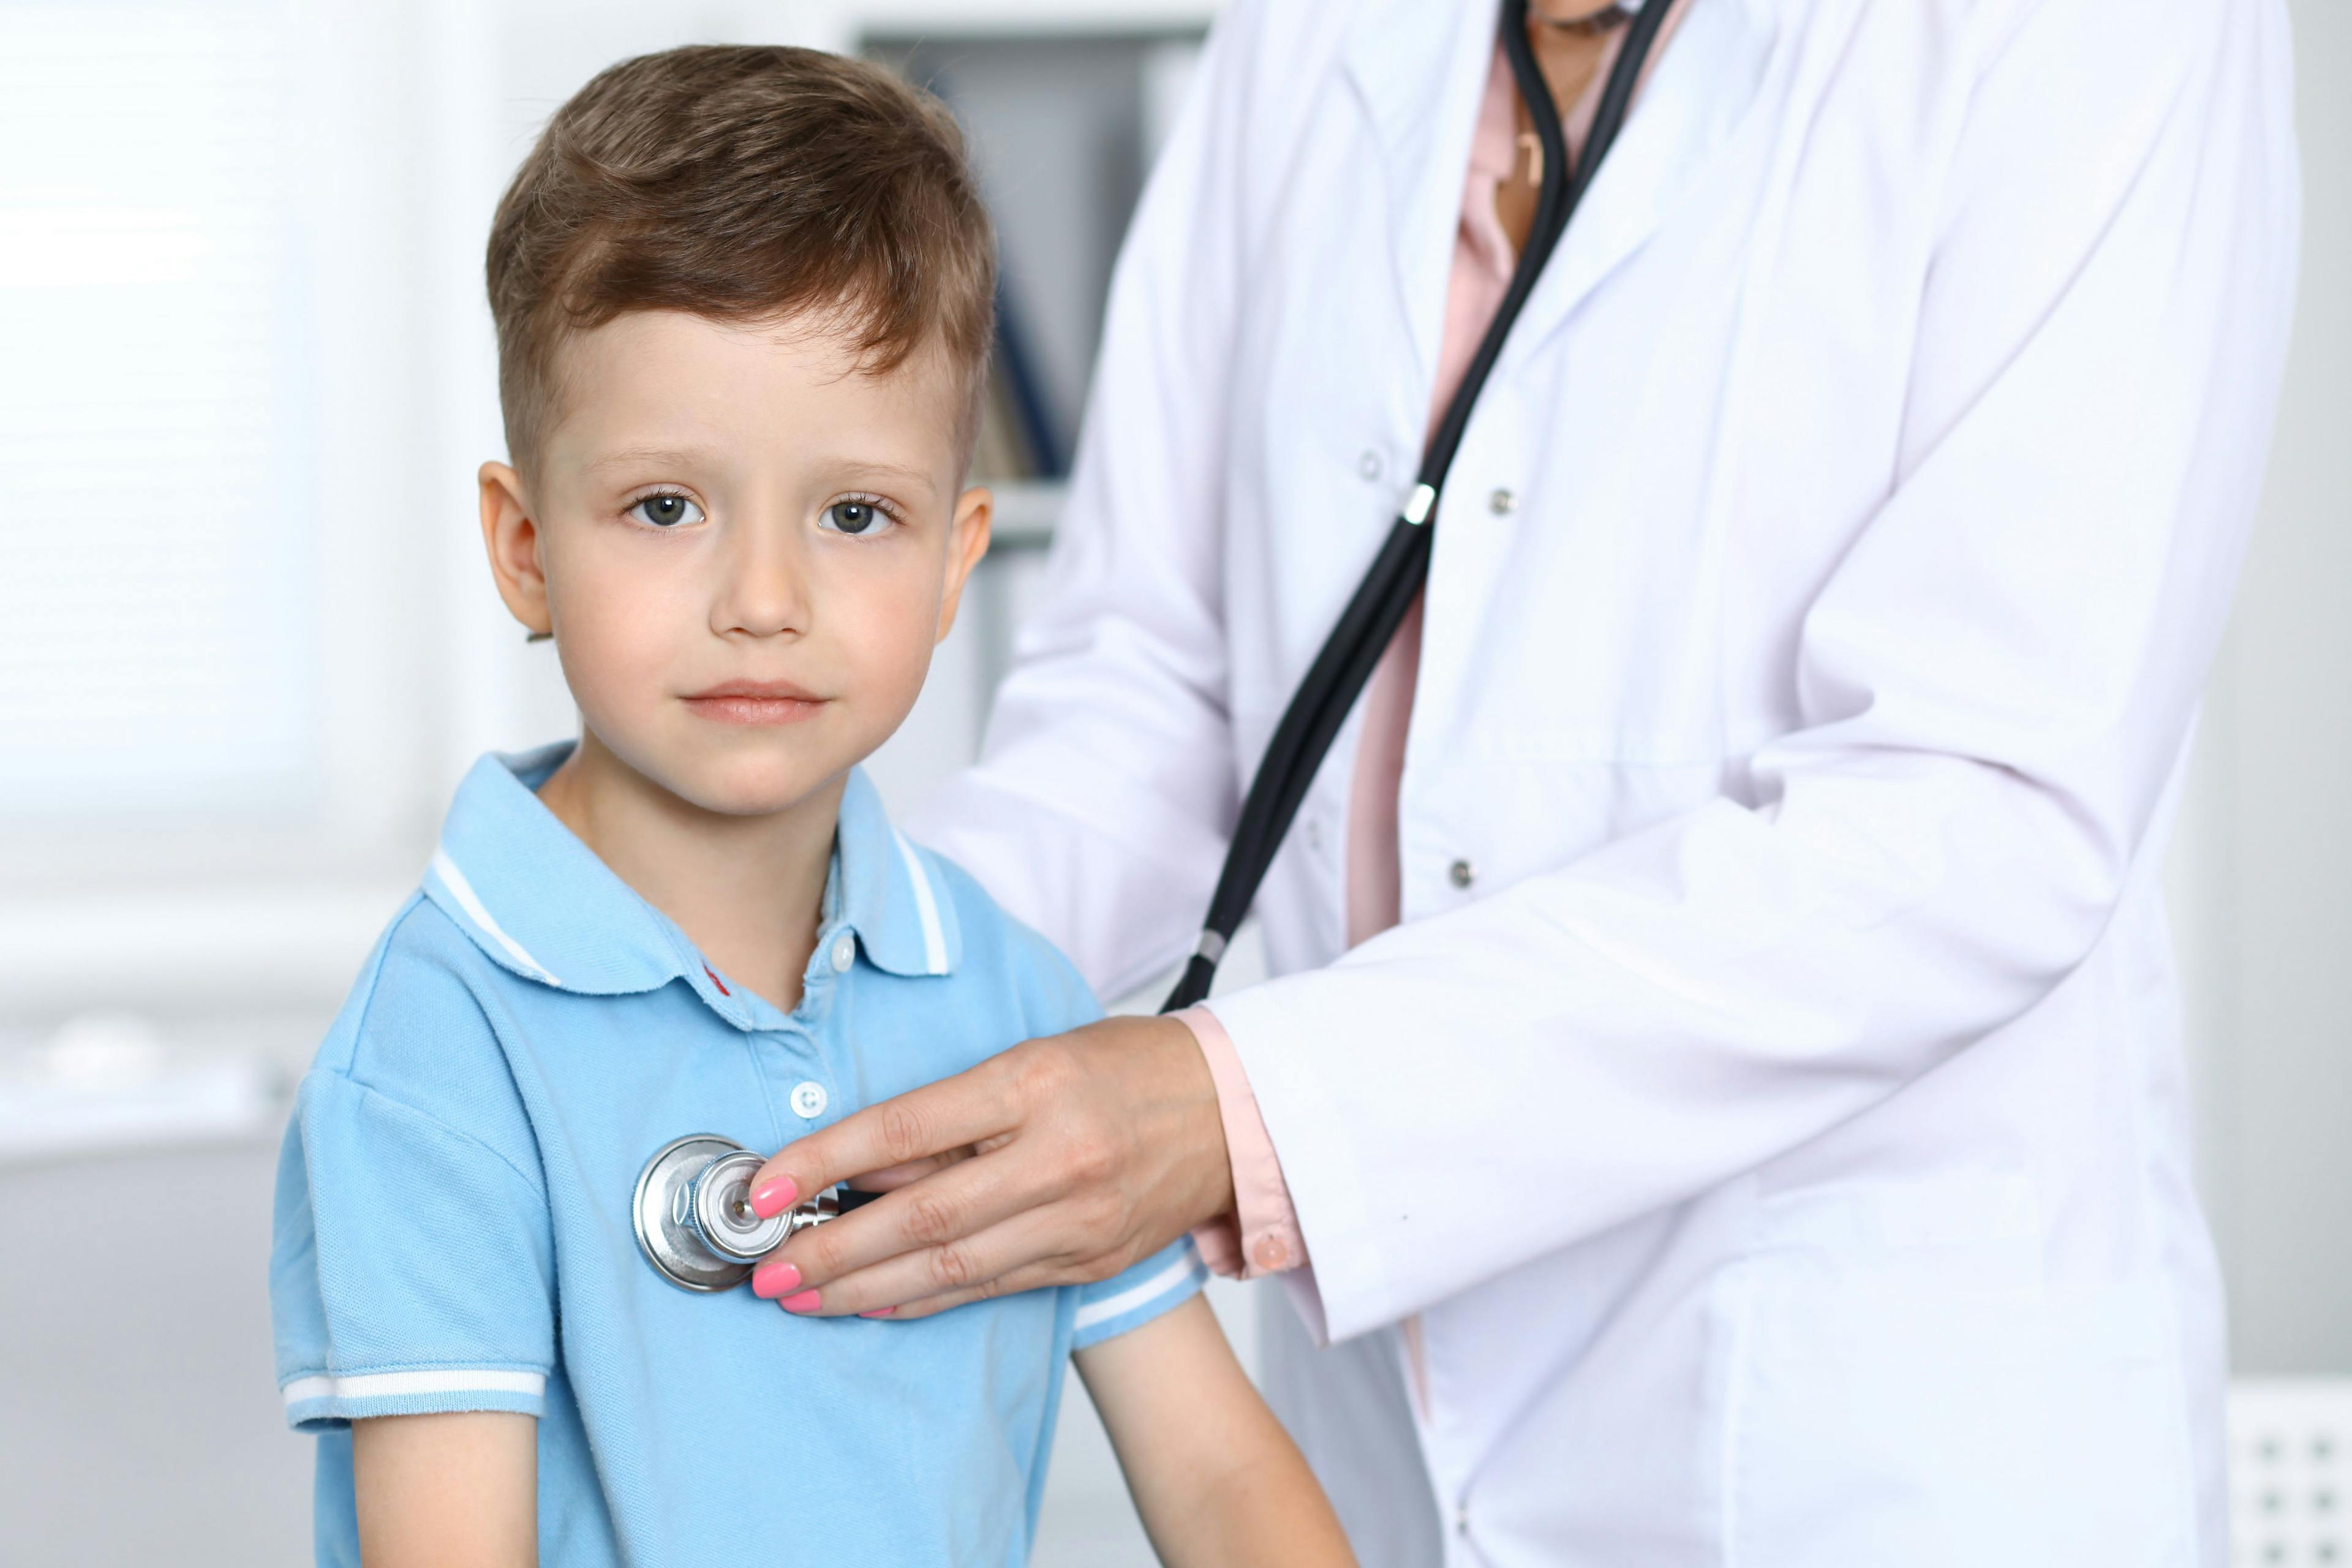 Doctors More Likely to Recommend Antihistamines Than Cold and Cough Medicine in Children